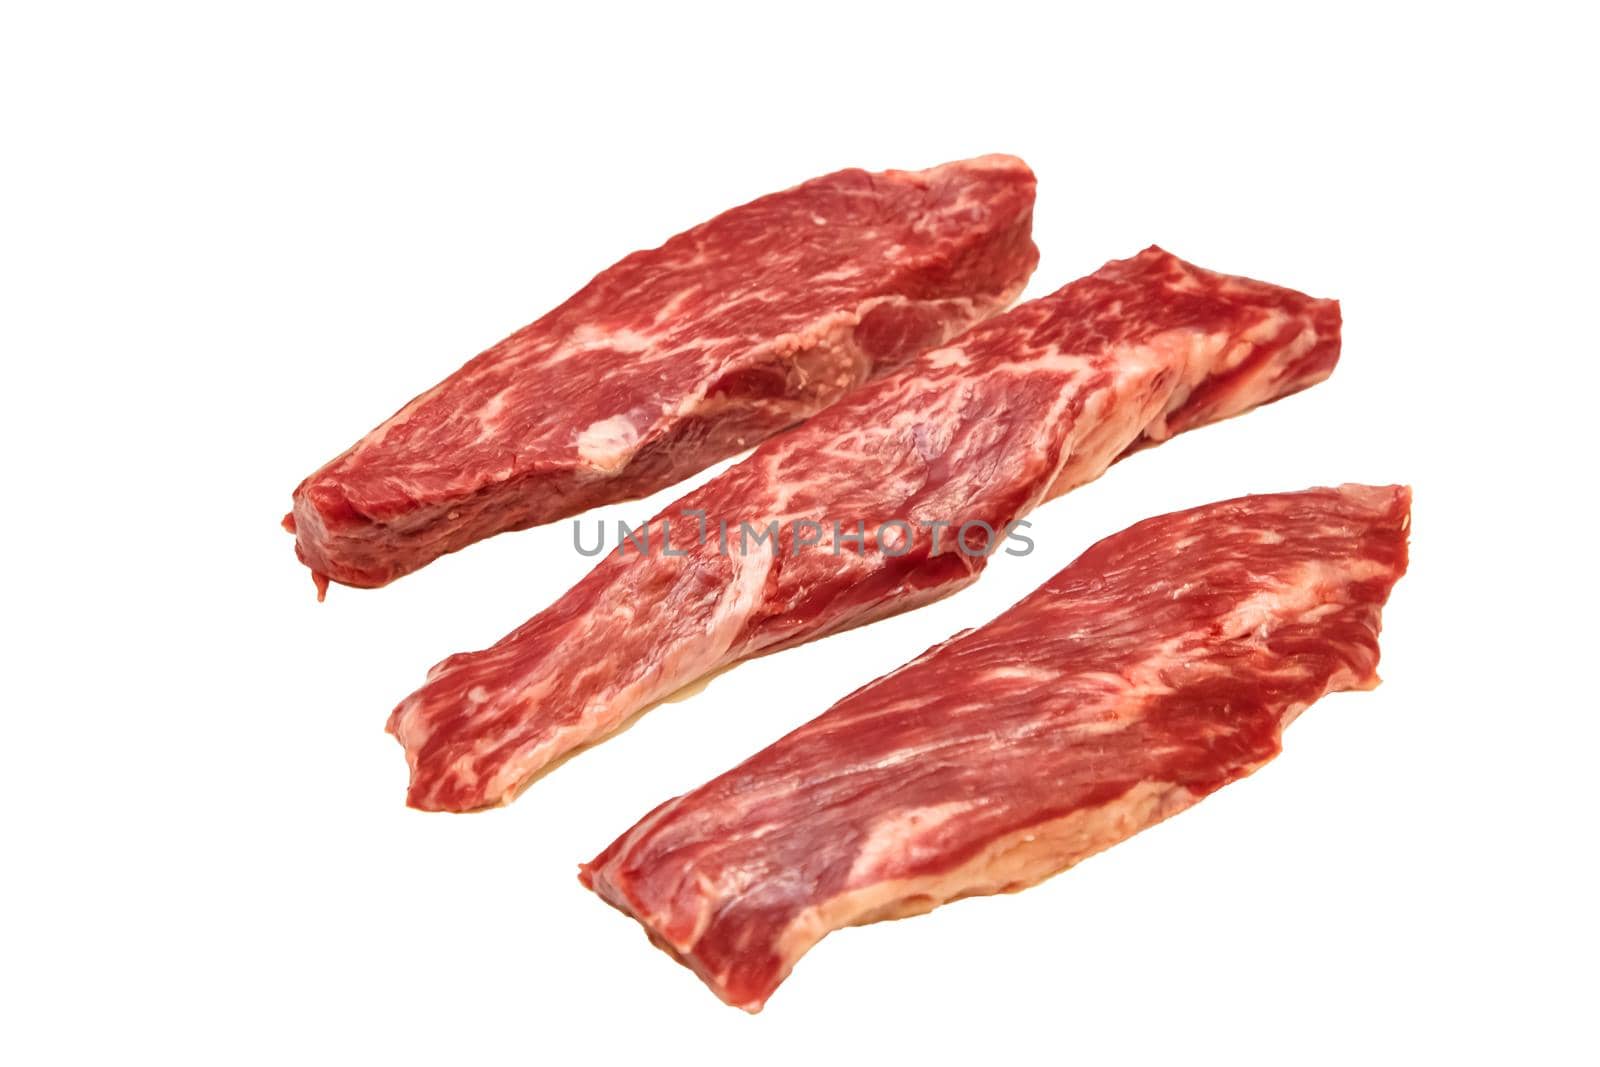 Steak Bottom Sirloin Flap Meat (Bavet) of marbled beef on a white background by Milanchikov